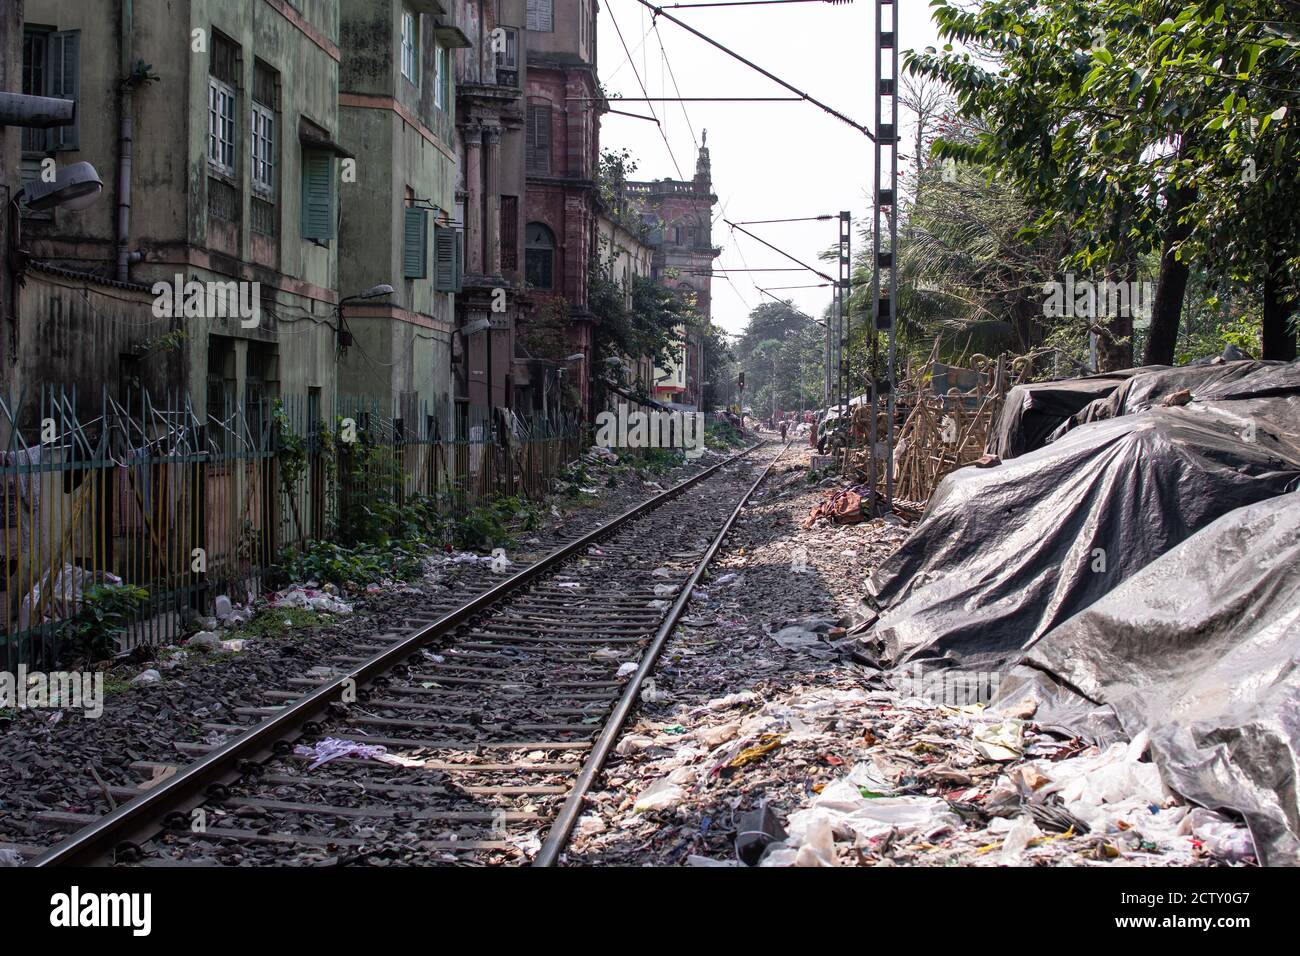 Railroad tracks next to residential apartment buildings and a lot of plastic waste in the slums of Kolkata, India Stock Photo